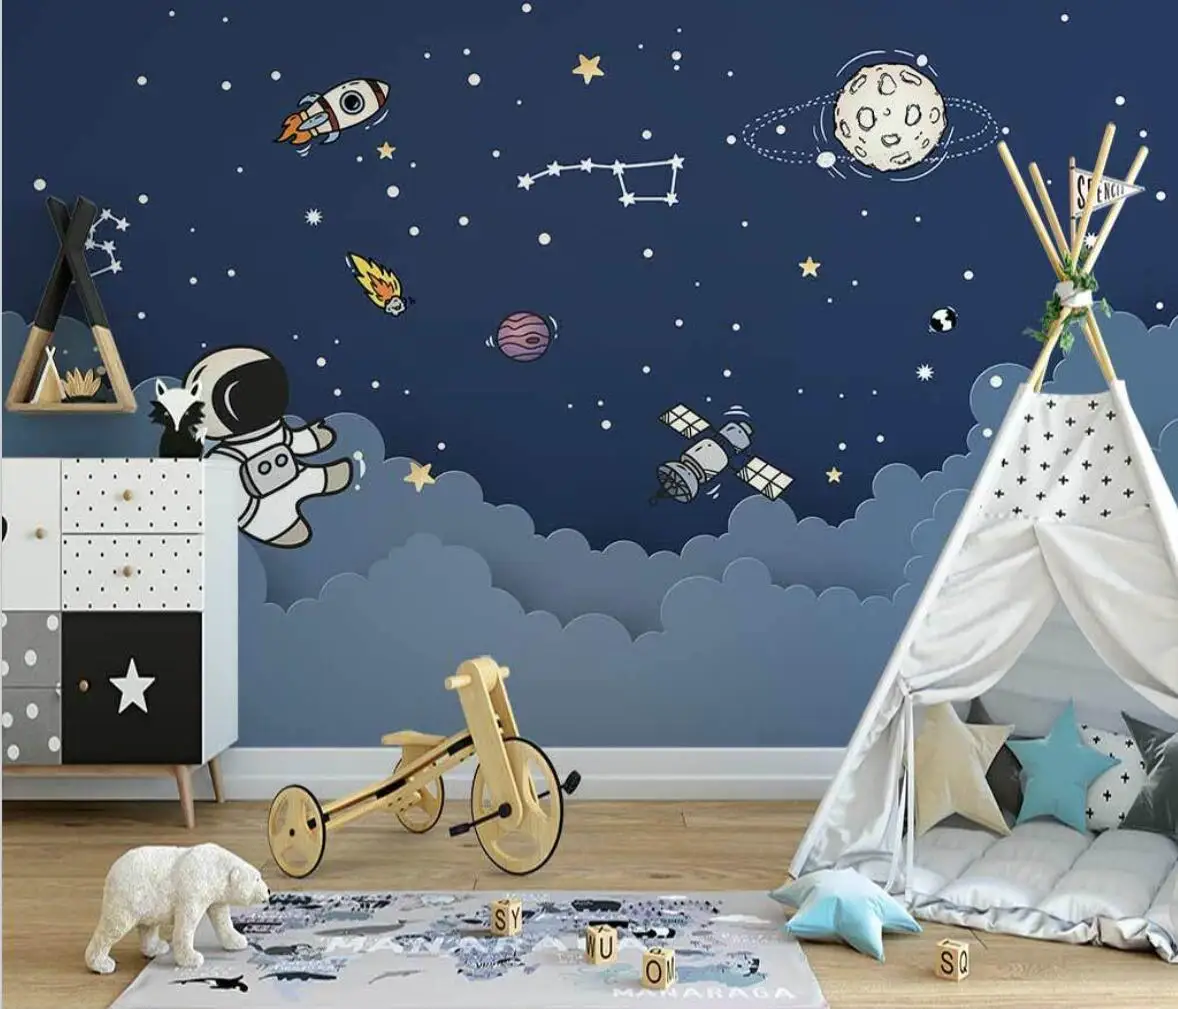 

beibehang custom cartoon universe starry sky clouds astronaut wallpaper for Child's room decoration TV background 3D wall paper